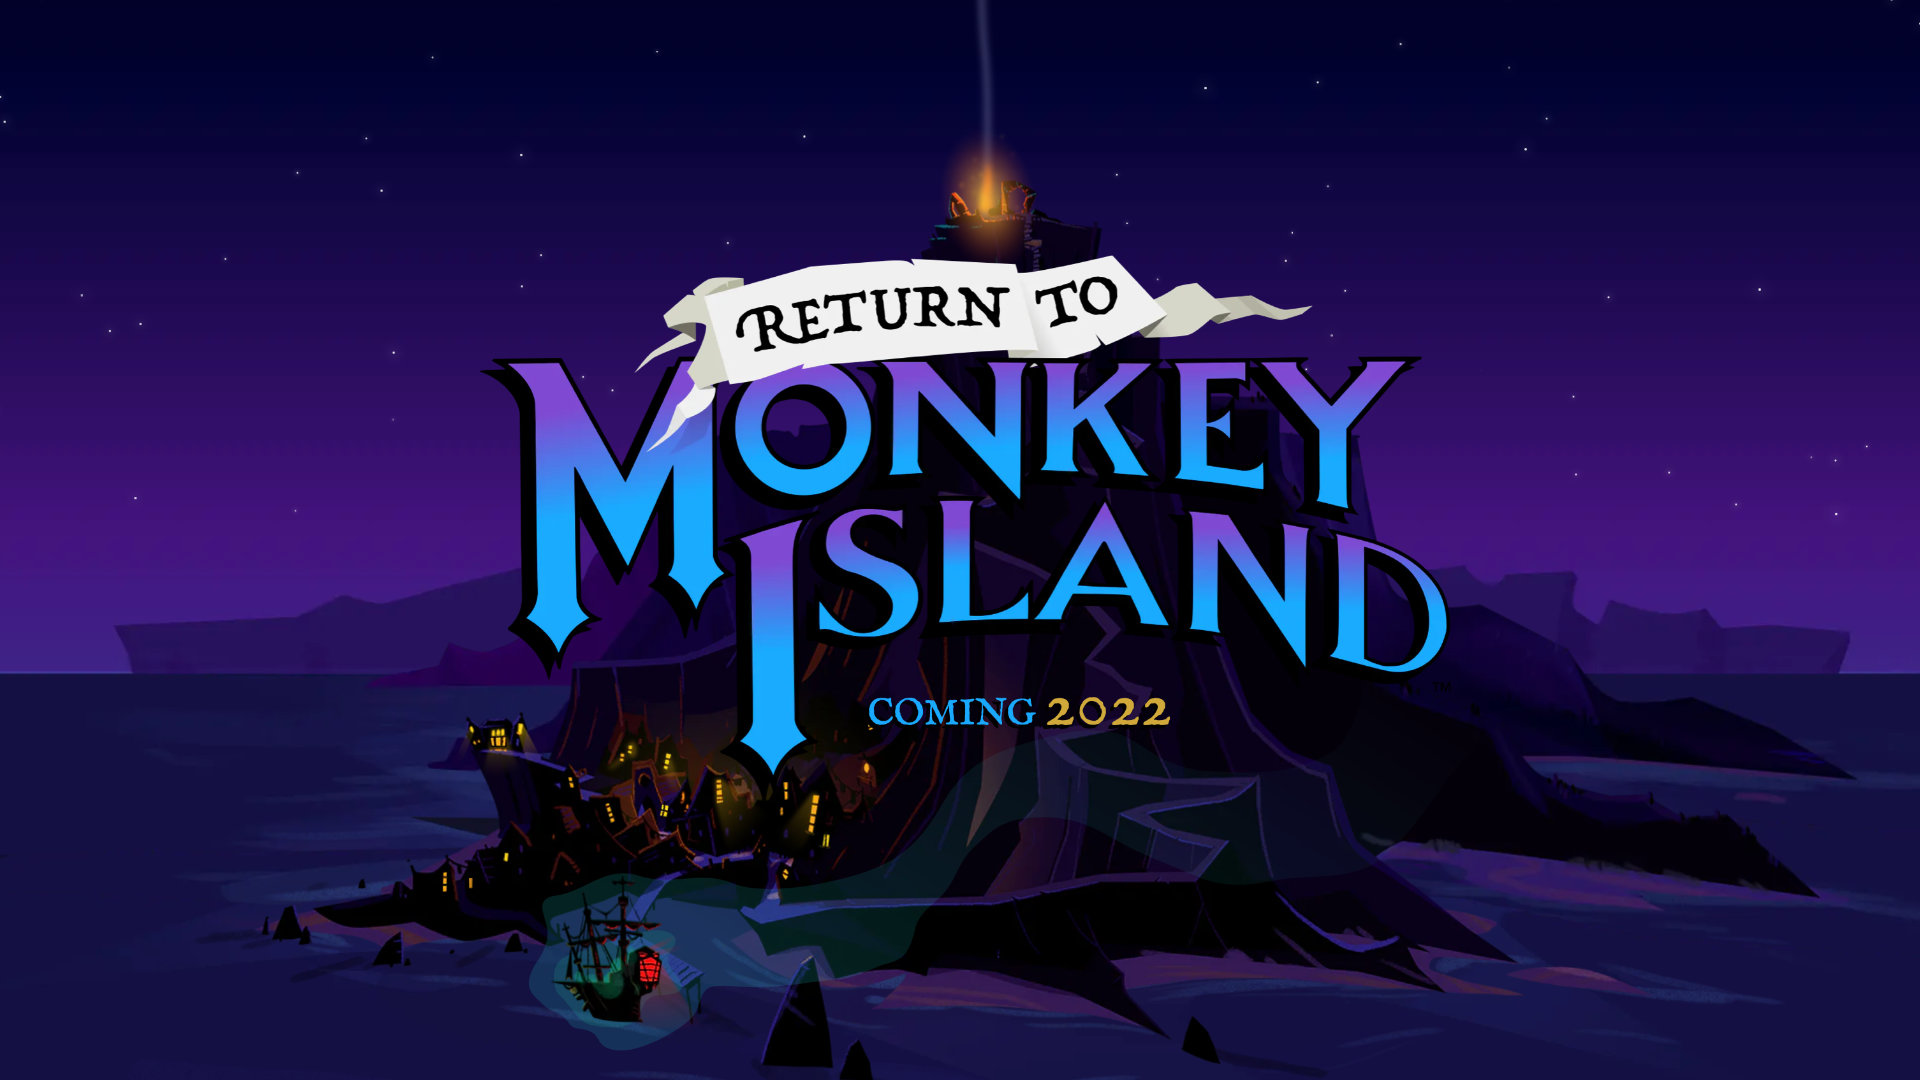 Return to Monkey Island logo over a volcano-like rocky island at night with a small village and pirate ship near the base.